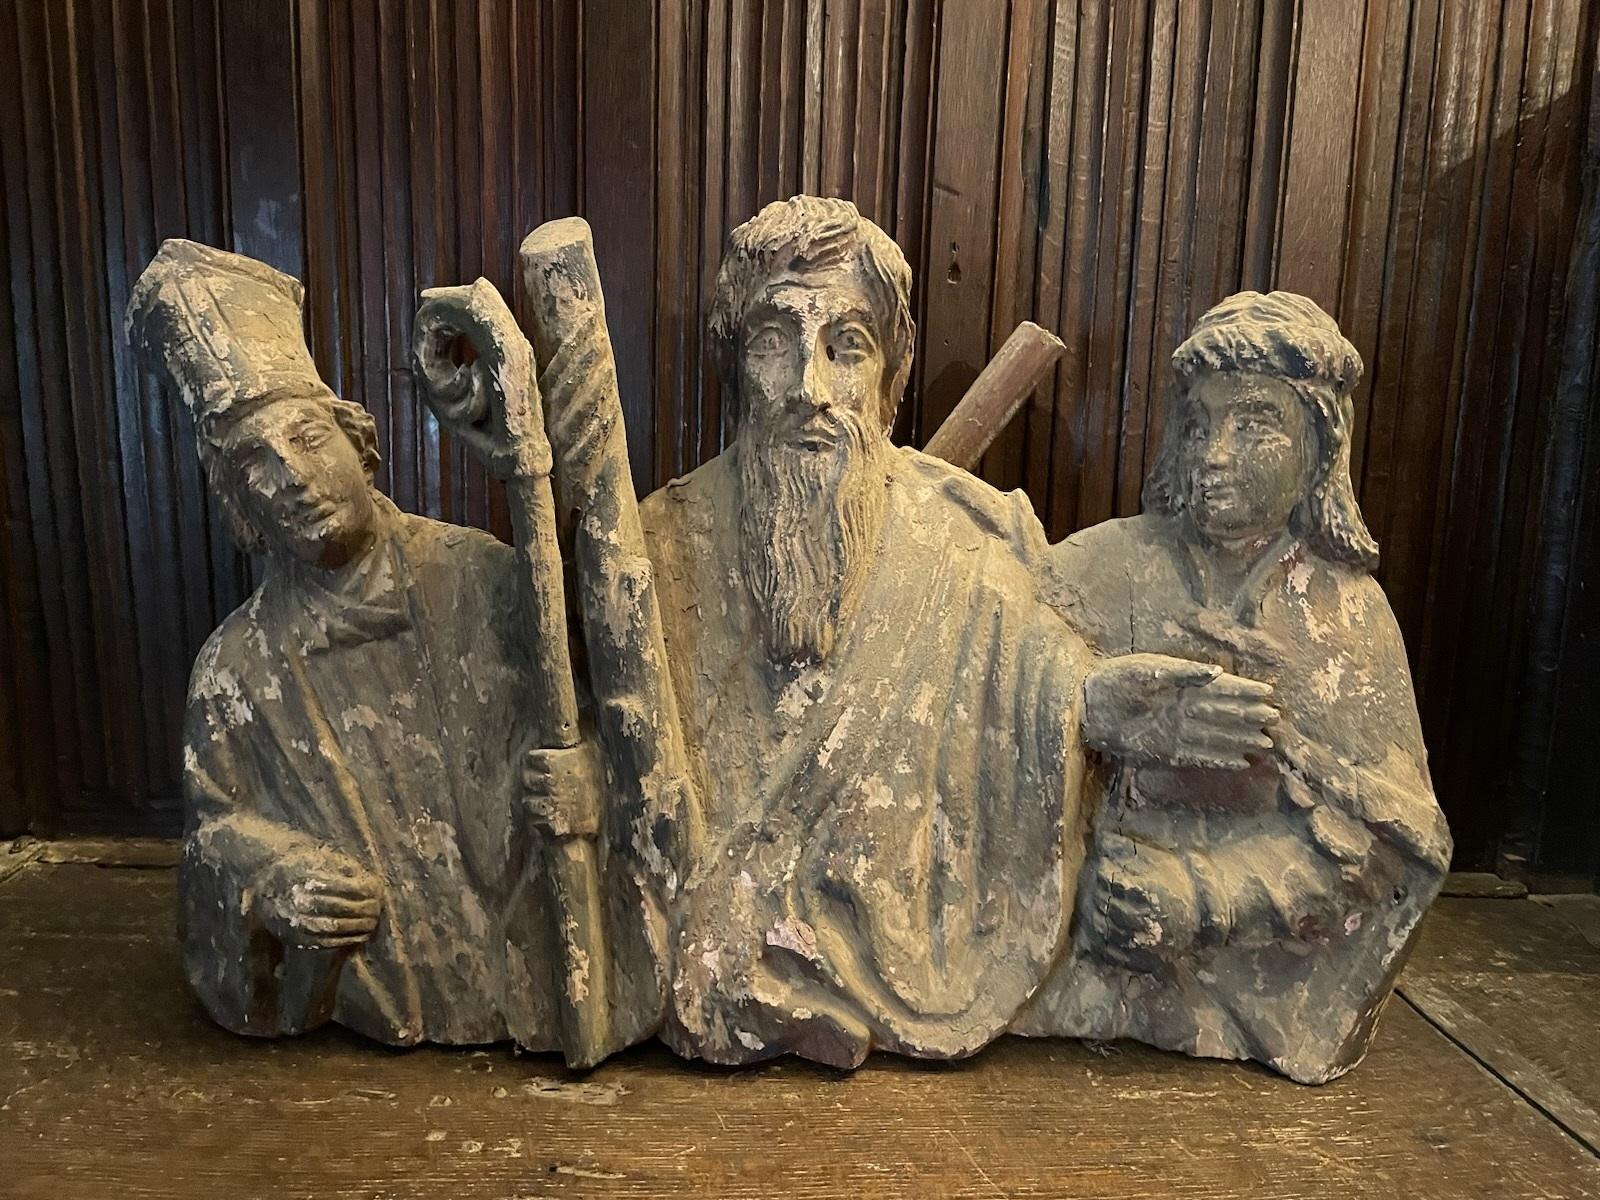 Medieval Style Carved Statue of 3 Religious Figures - Sculpture by Unknown